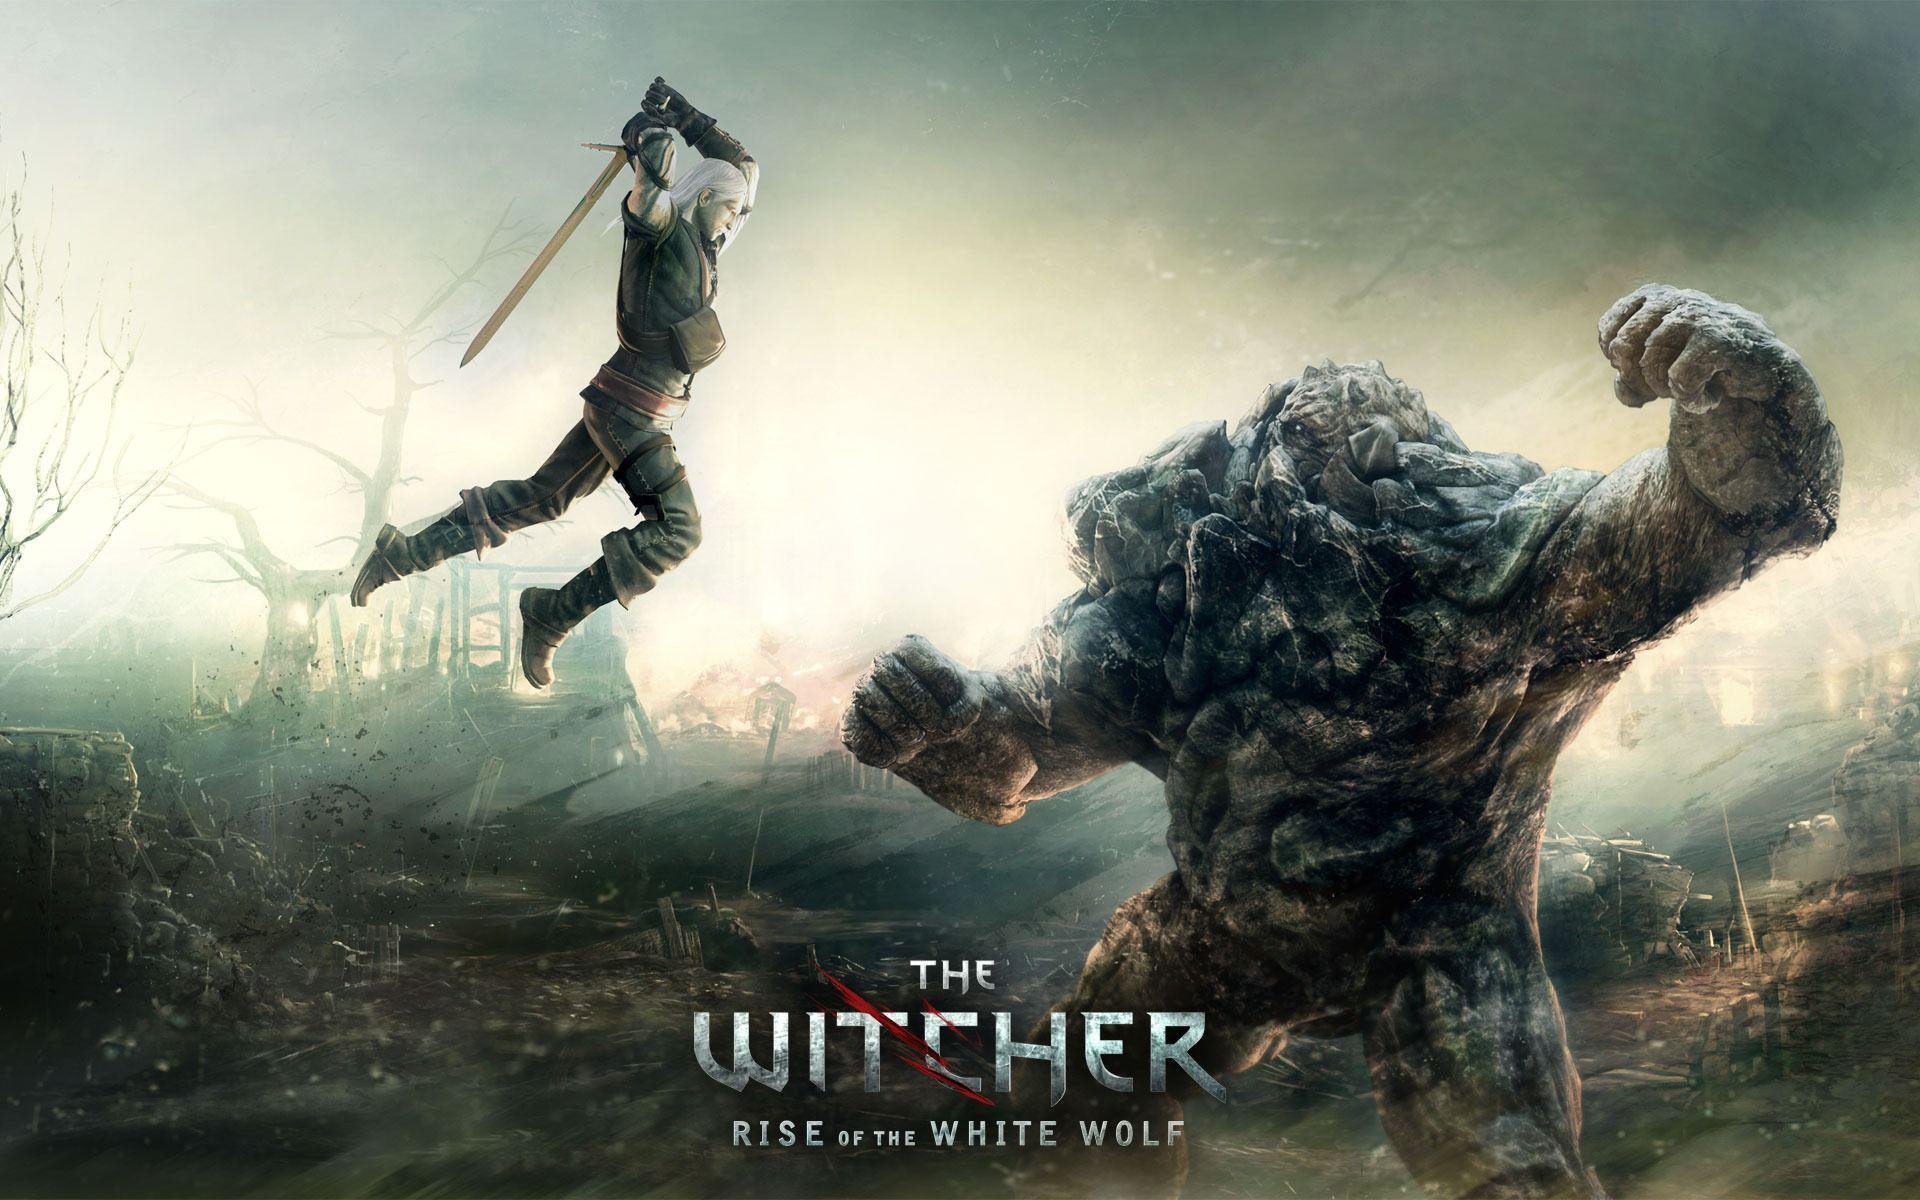 Download The Witcher Rise of the White Wolf Wallpaper The Witcher